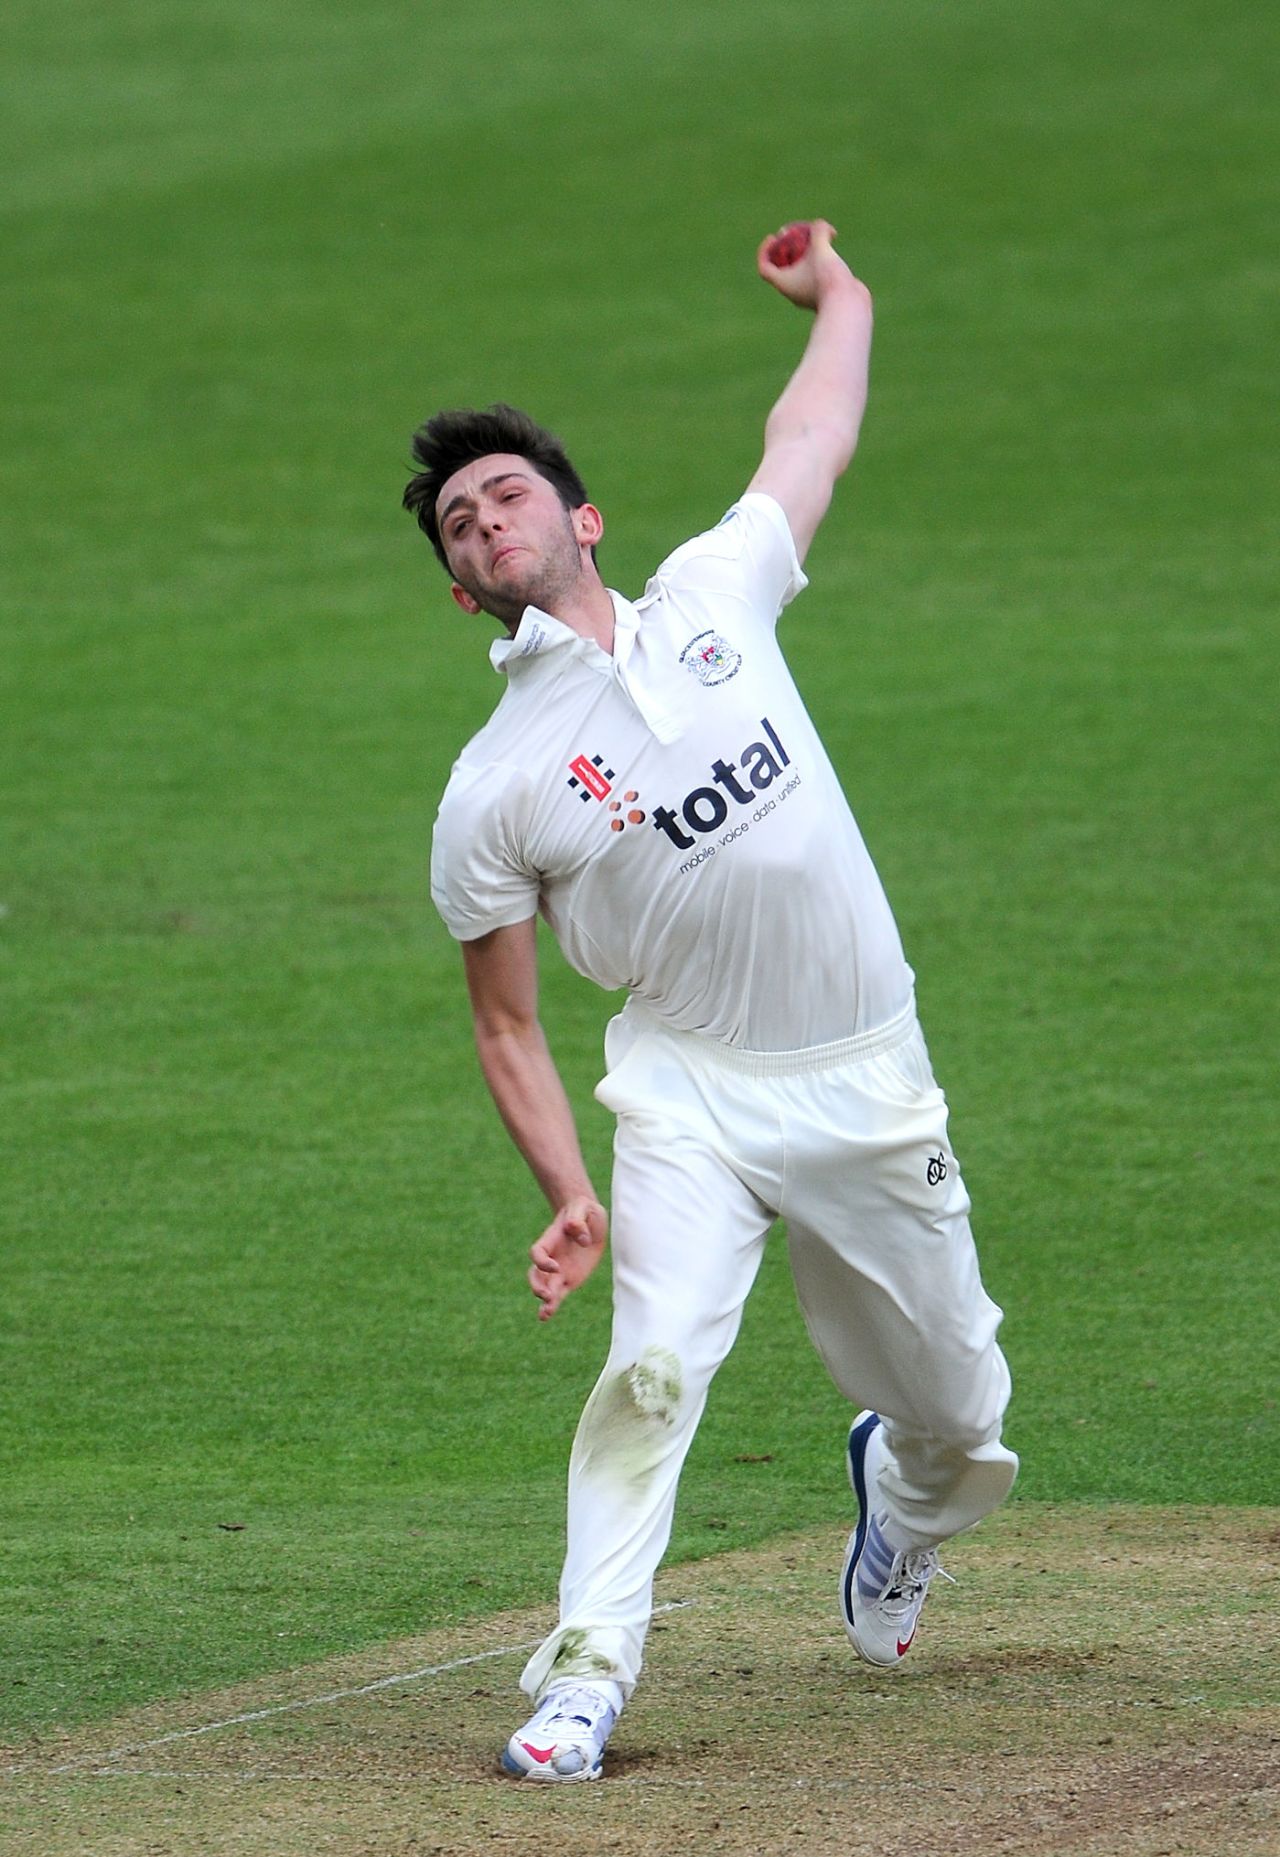 Matt Taylor in action for Gloucestershire, Gloucestershire v Durham, Bristol, May 2015